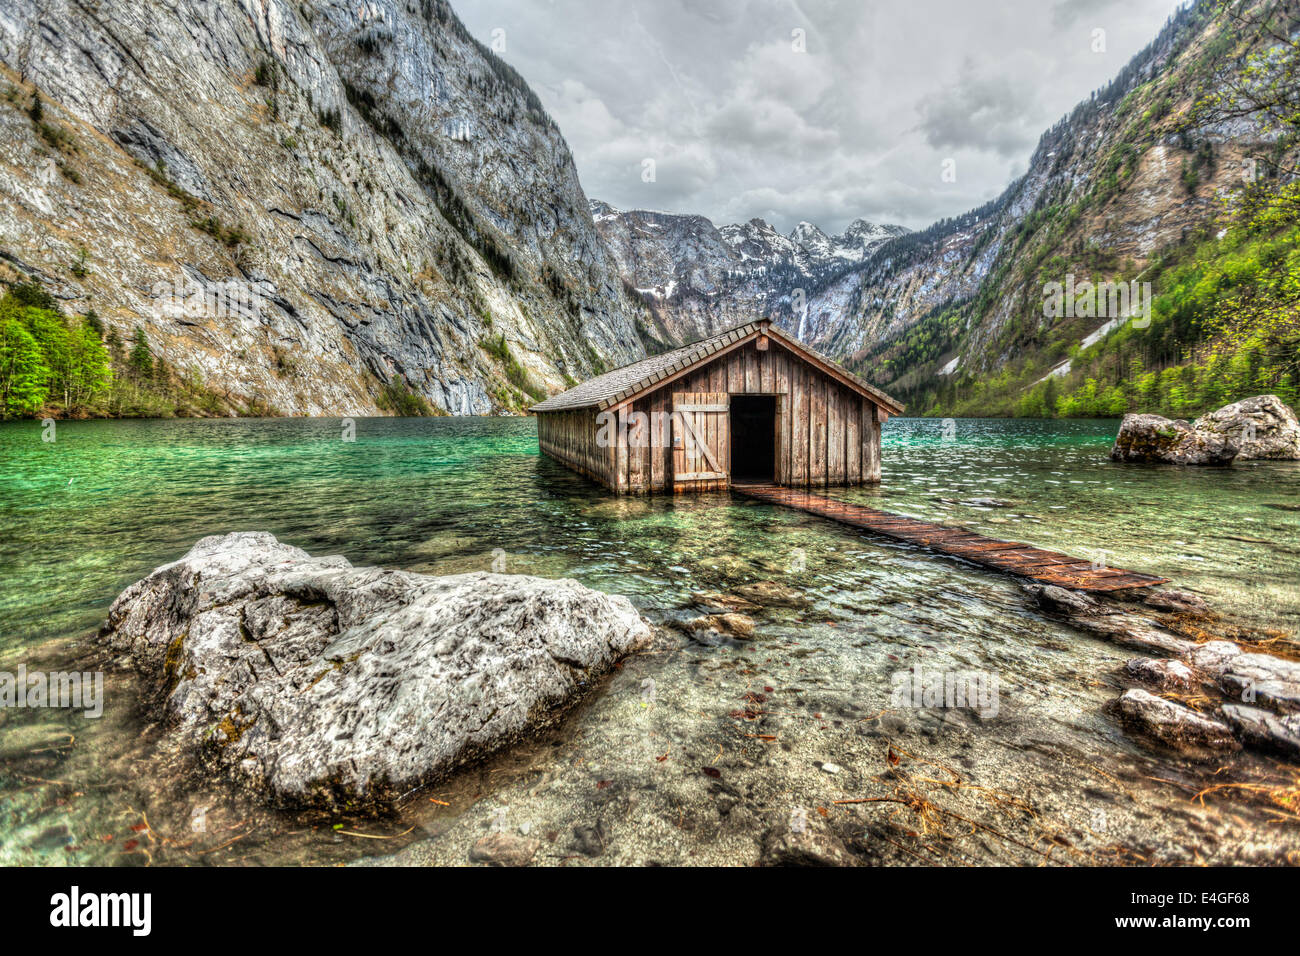 High dynamic range (HDR) image of boat dock hangar on Obersee mountain lake in Alps. Bavaria, Germany Stock Photo